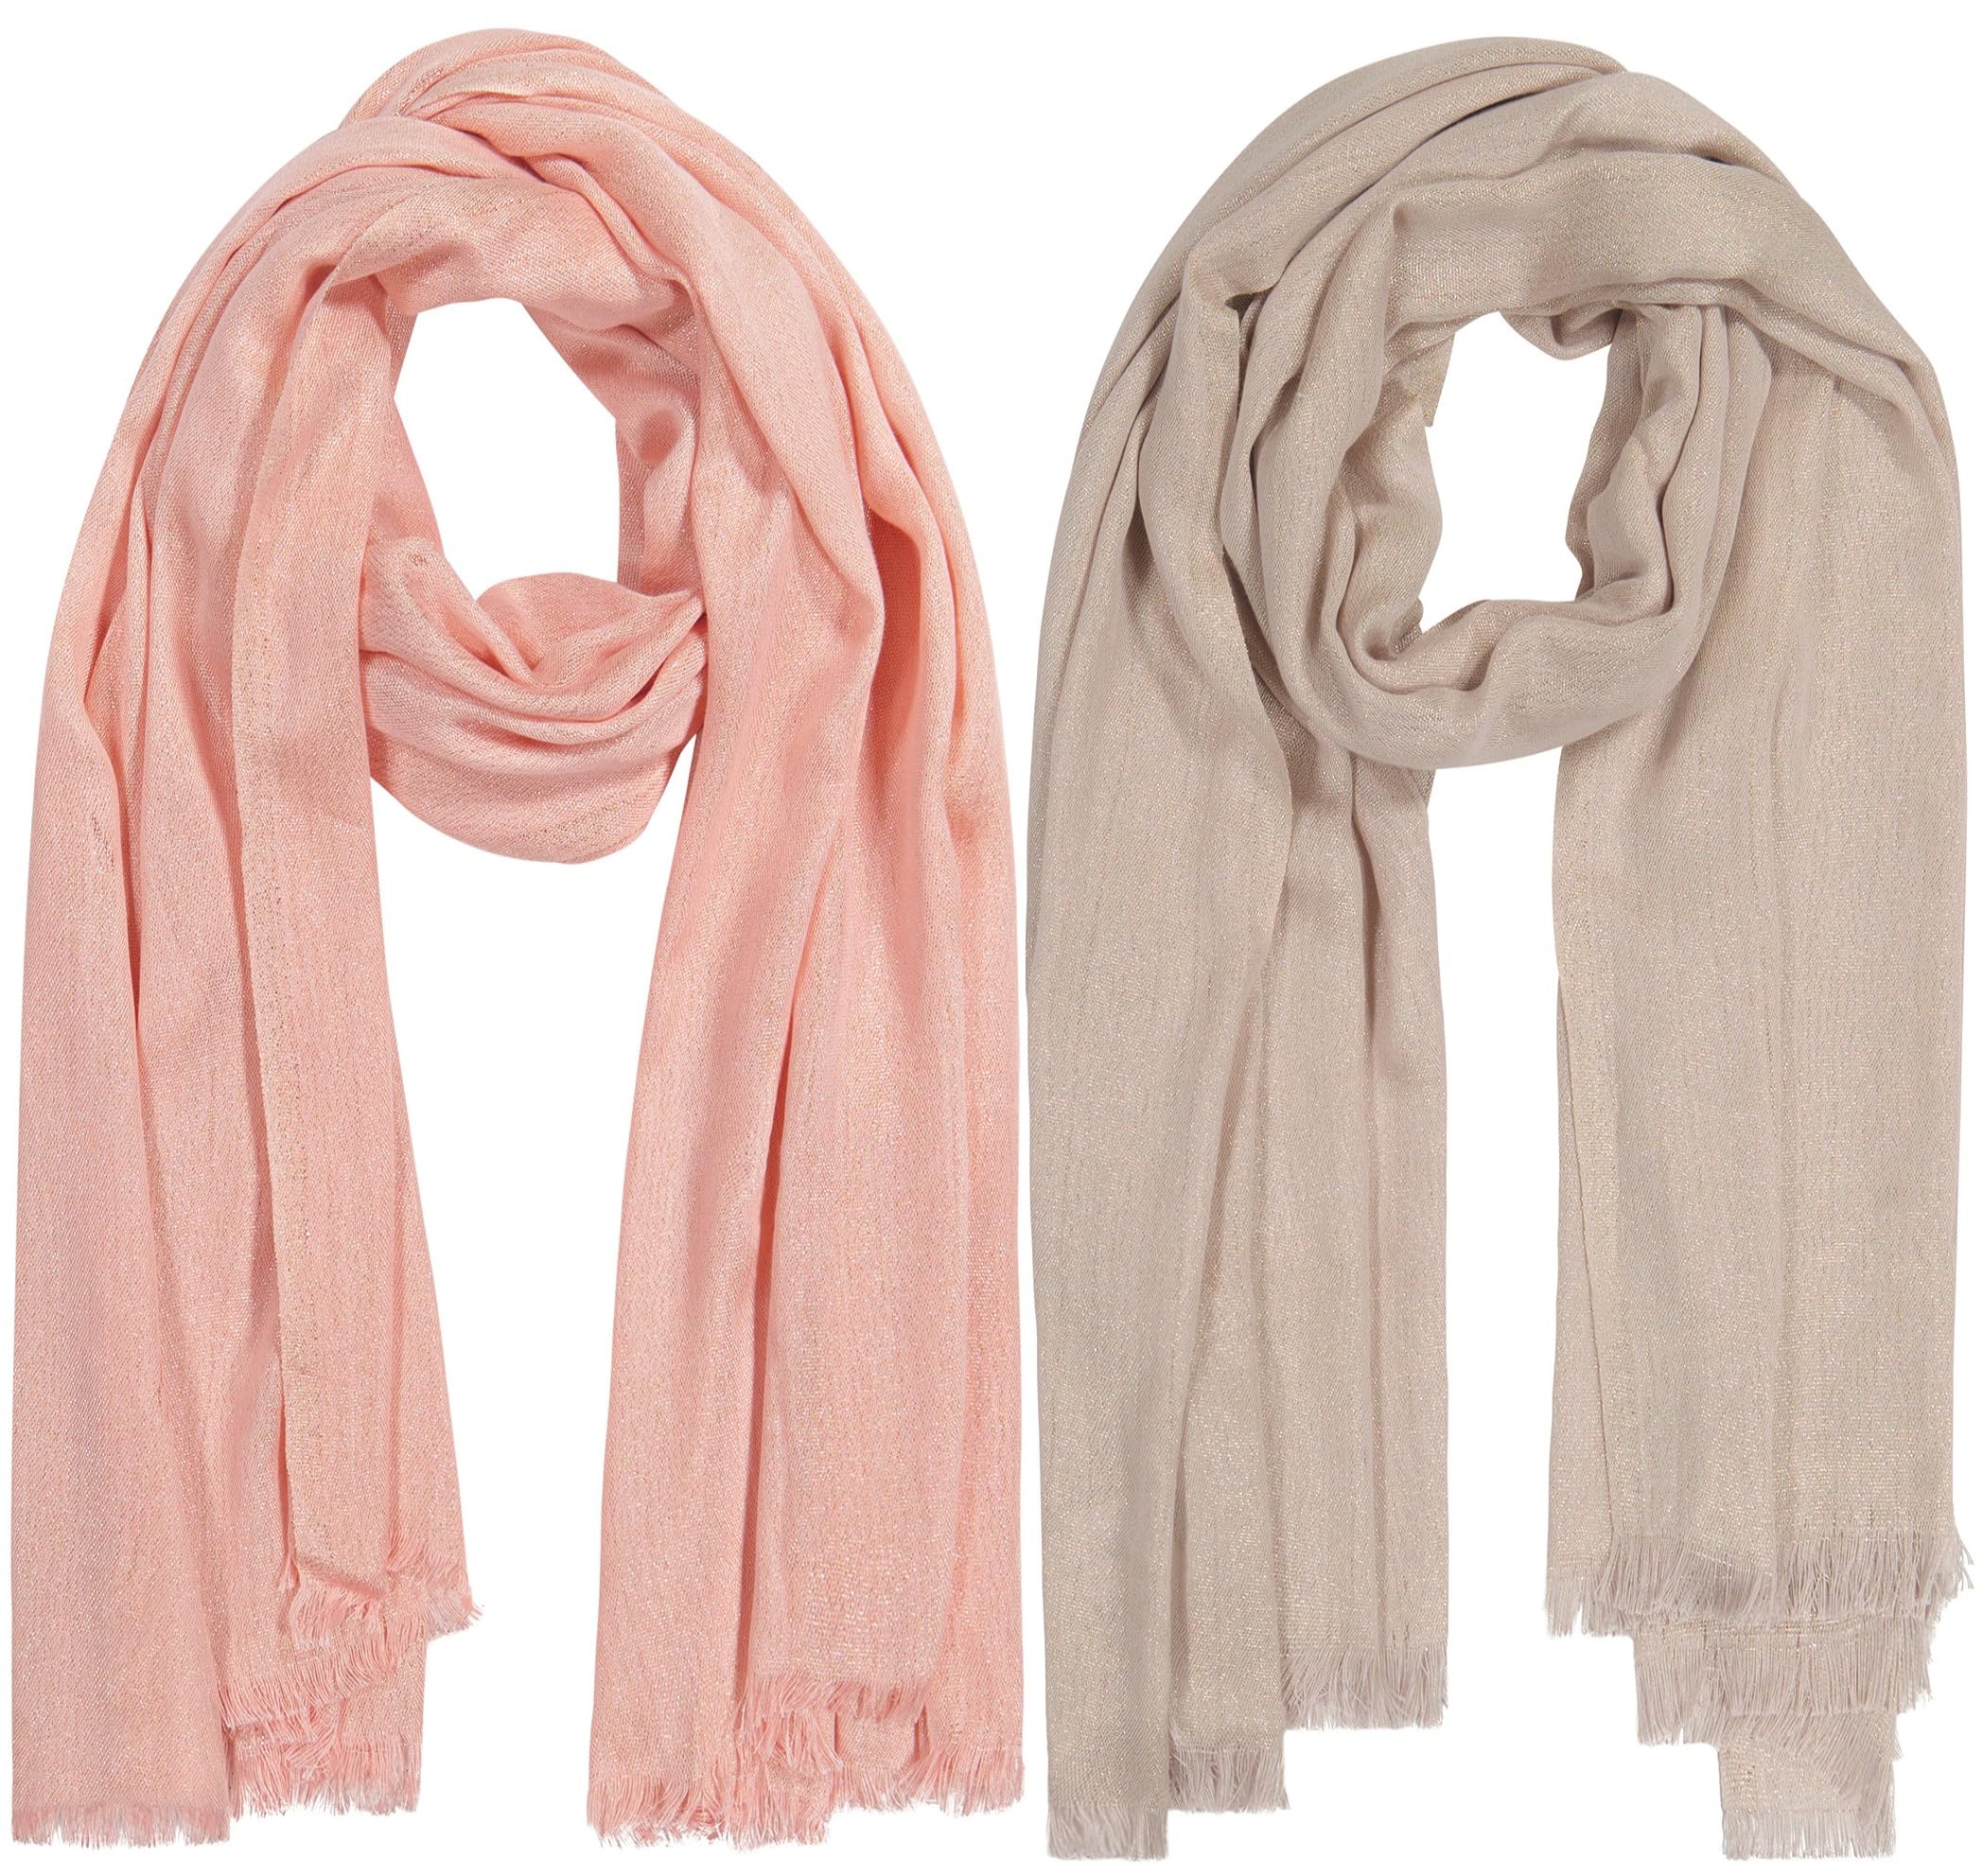 Nicole Miller Womens Fashion Scarf and Shawl Wrap for Spring/Summer WinterScarves